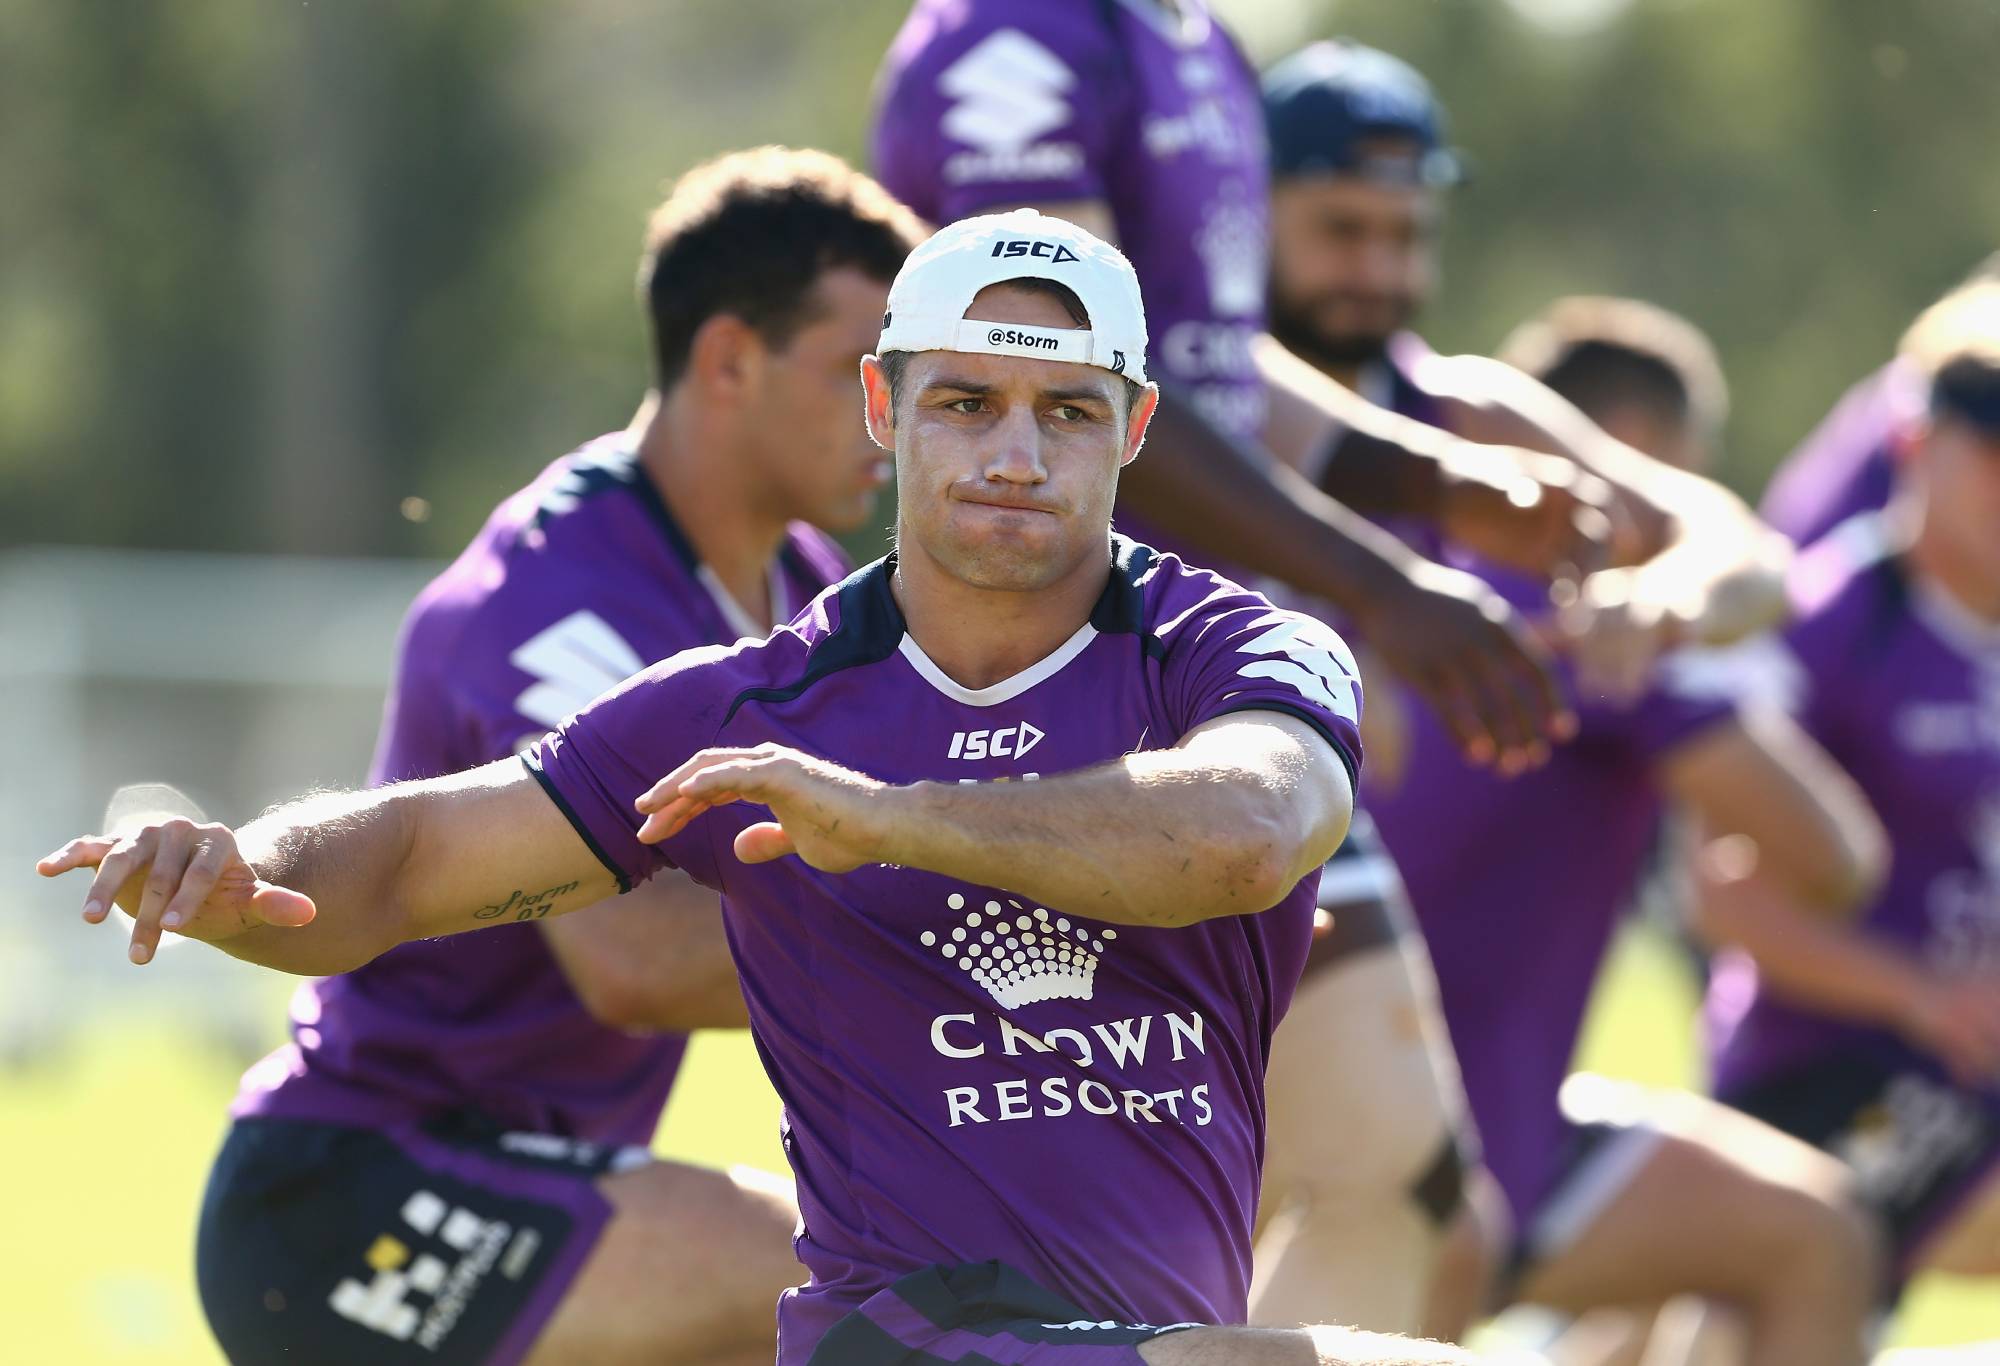 MELBOURNE, AUSTRALIA - FEBRUARY 27: Cooper Cronk warms up during the Melbourne Storm NRL training session at Gosch's Paddock on February 27, 2017 in Melbourne, Australia. (Photo by Robert Prezioso/Getty Images)